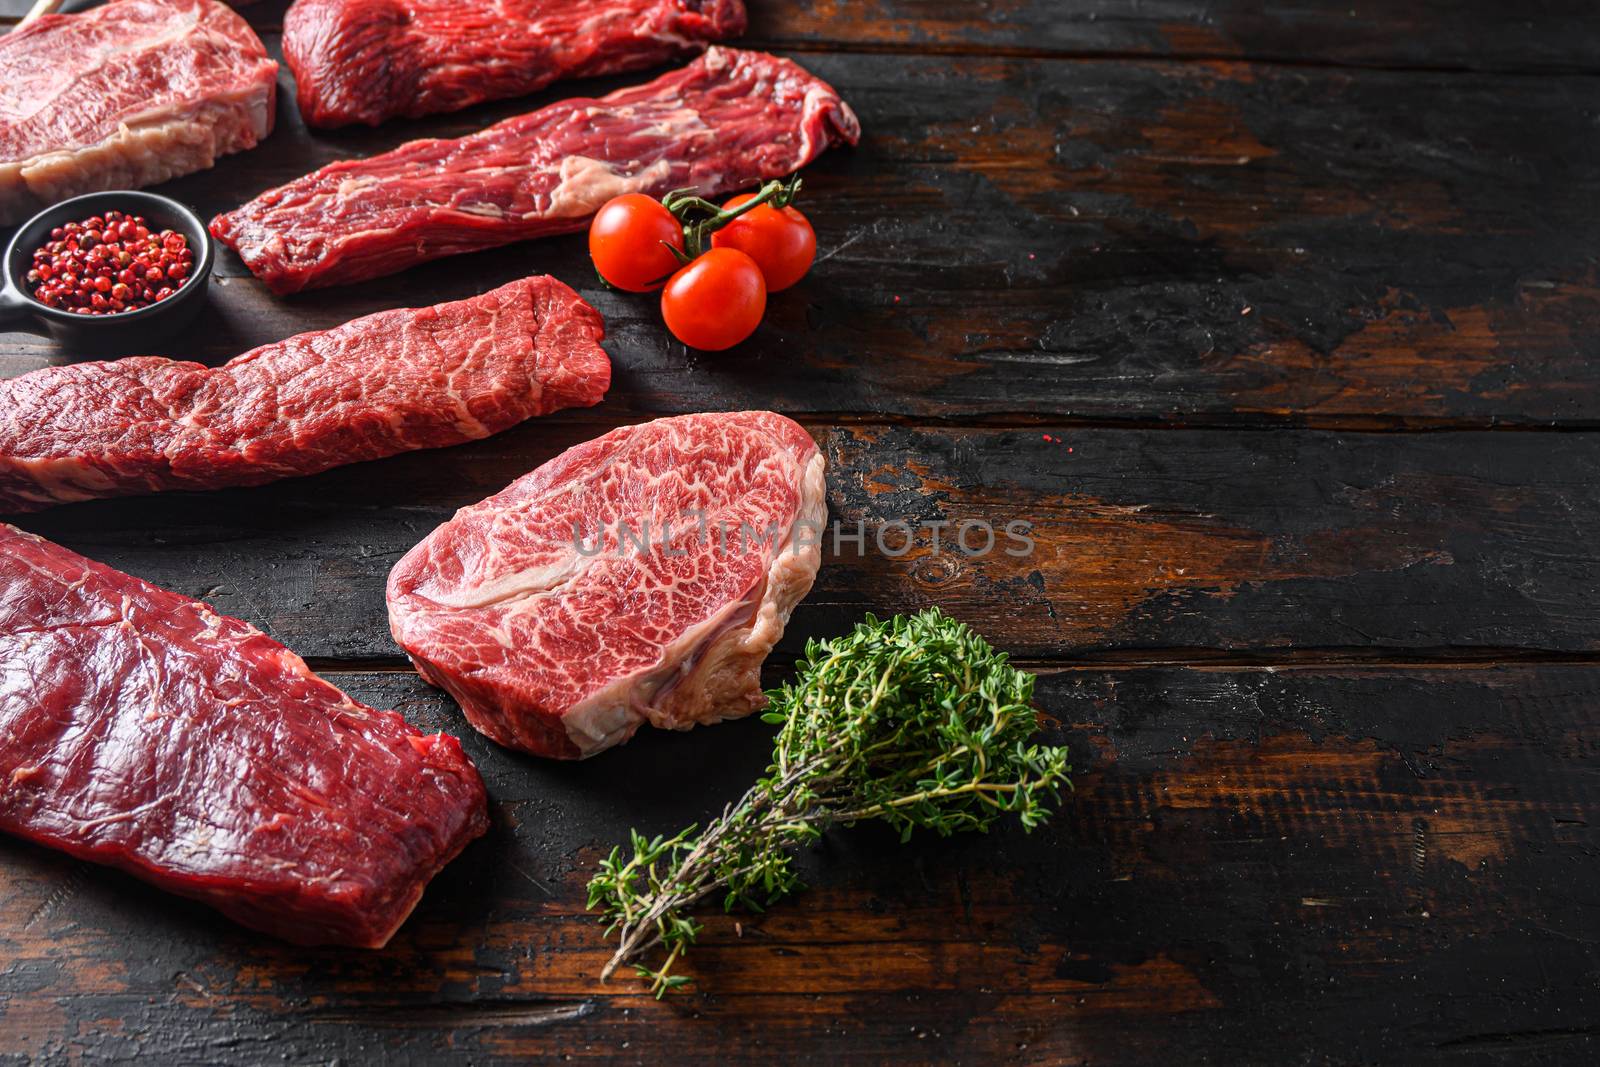 Set of fresh raw alternative beef steaks flap flank Steak, machete steak or skirt cut, Top blade or flat iron beef and tri tip, triangle roast with denver cut side view over old butcher wood table close up space for text by Ilianesolenyi